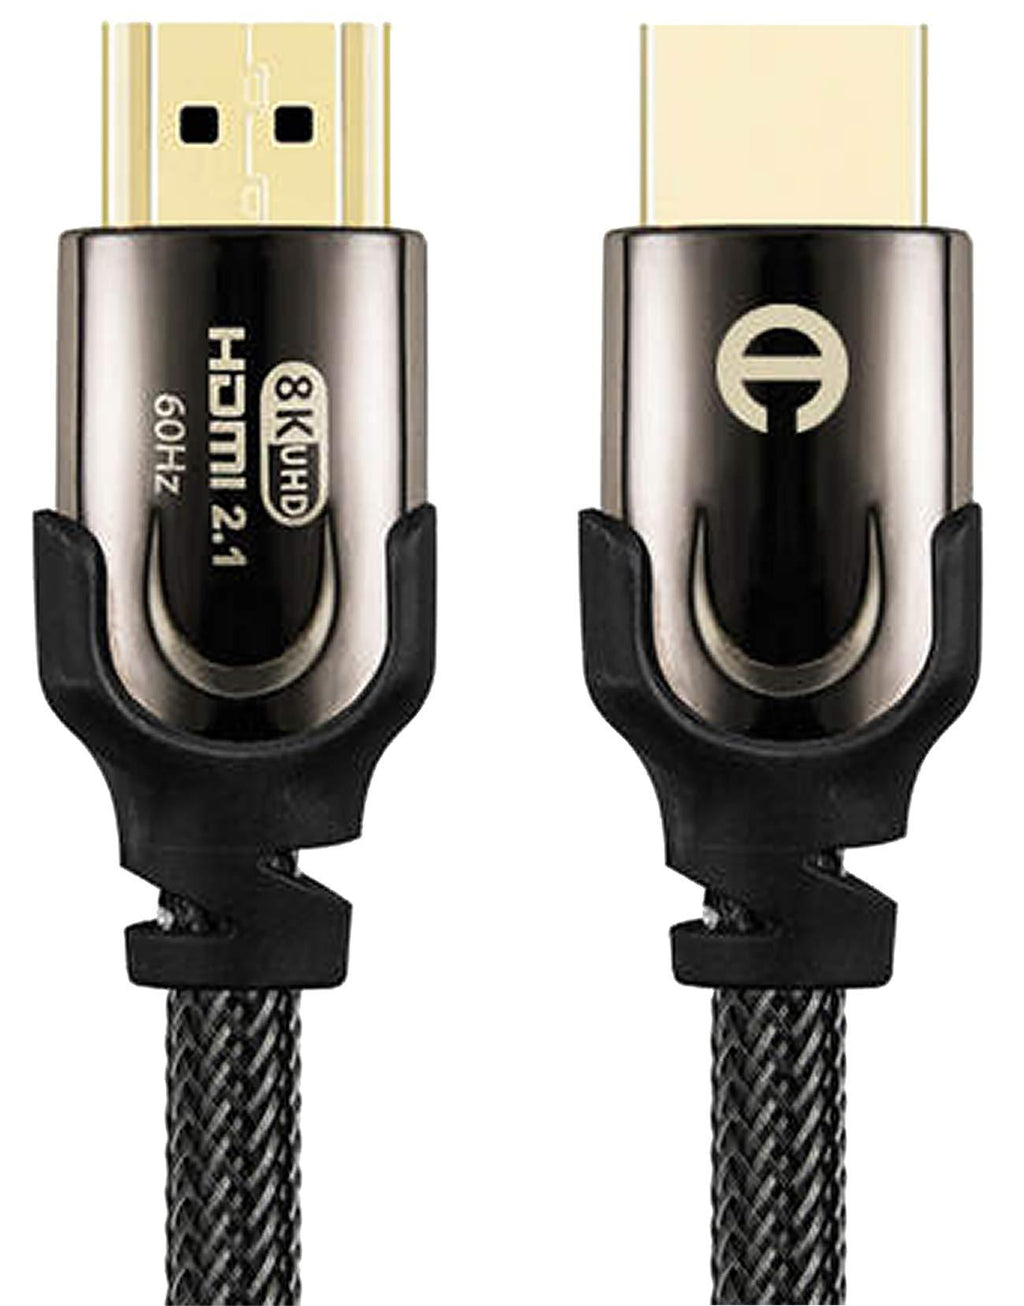 8K HDMI Cable 2.1 Full 19+1pin 6.6 ft Gold Plated Ultra-High Speed 48Gbps 60Hz / 4K 120Hz Pure Oxygen-Free Copper Triple Shield Ethernet eARC Compatible Apple TV LG OLED Samsung QLED (6.6ft)